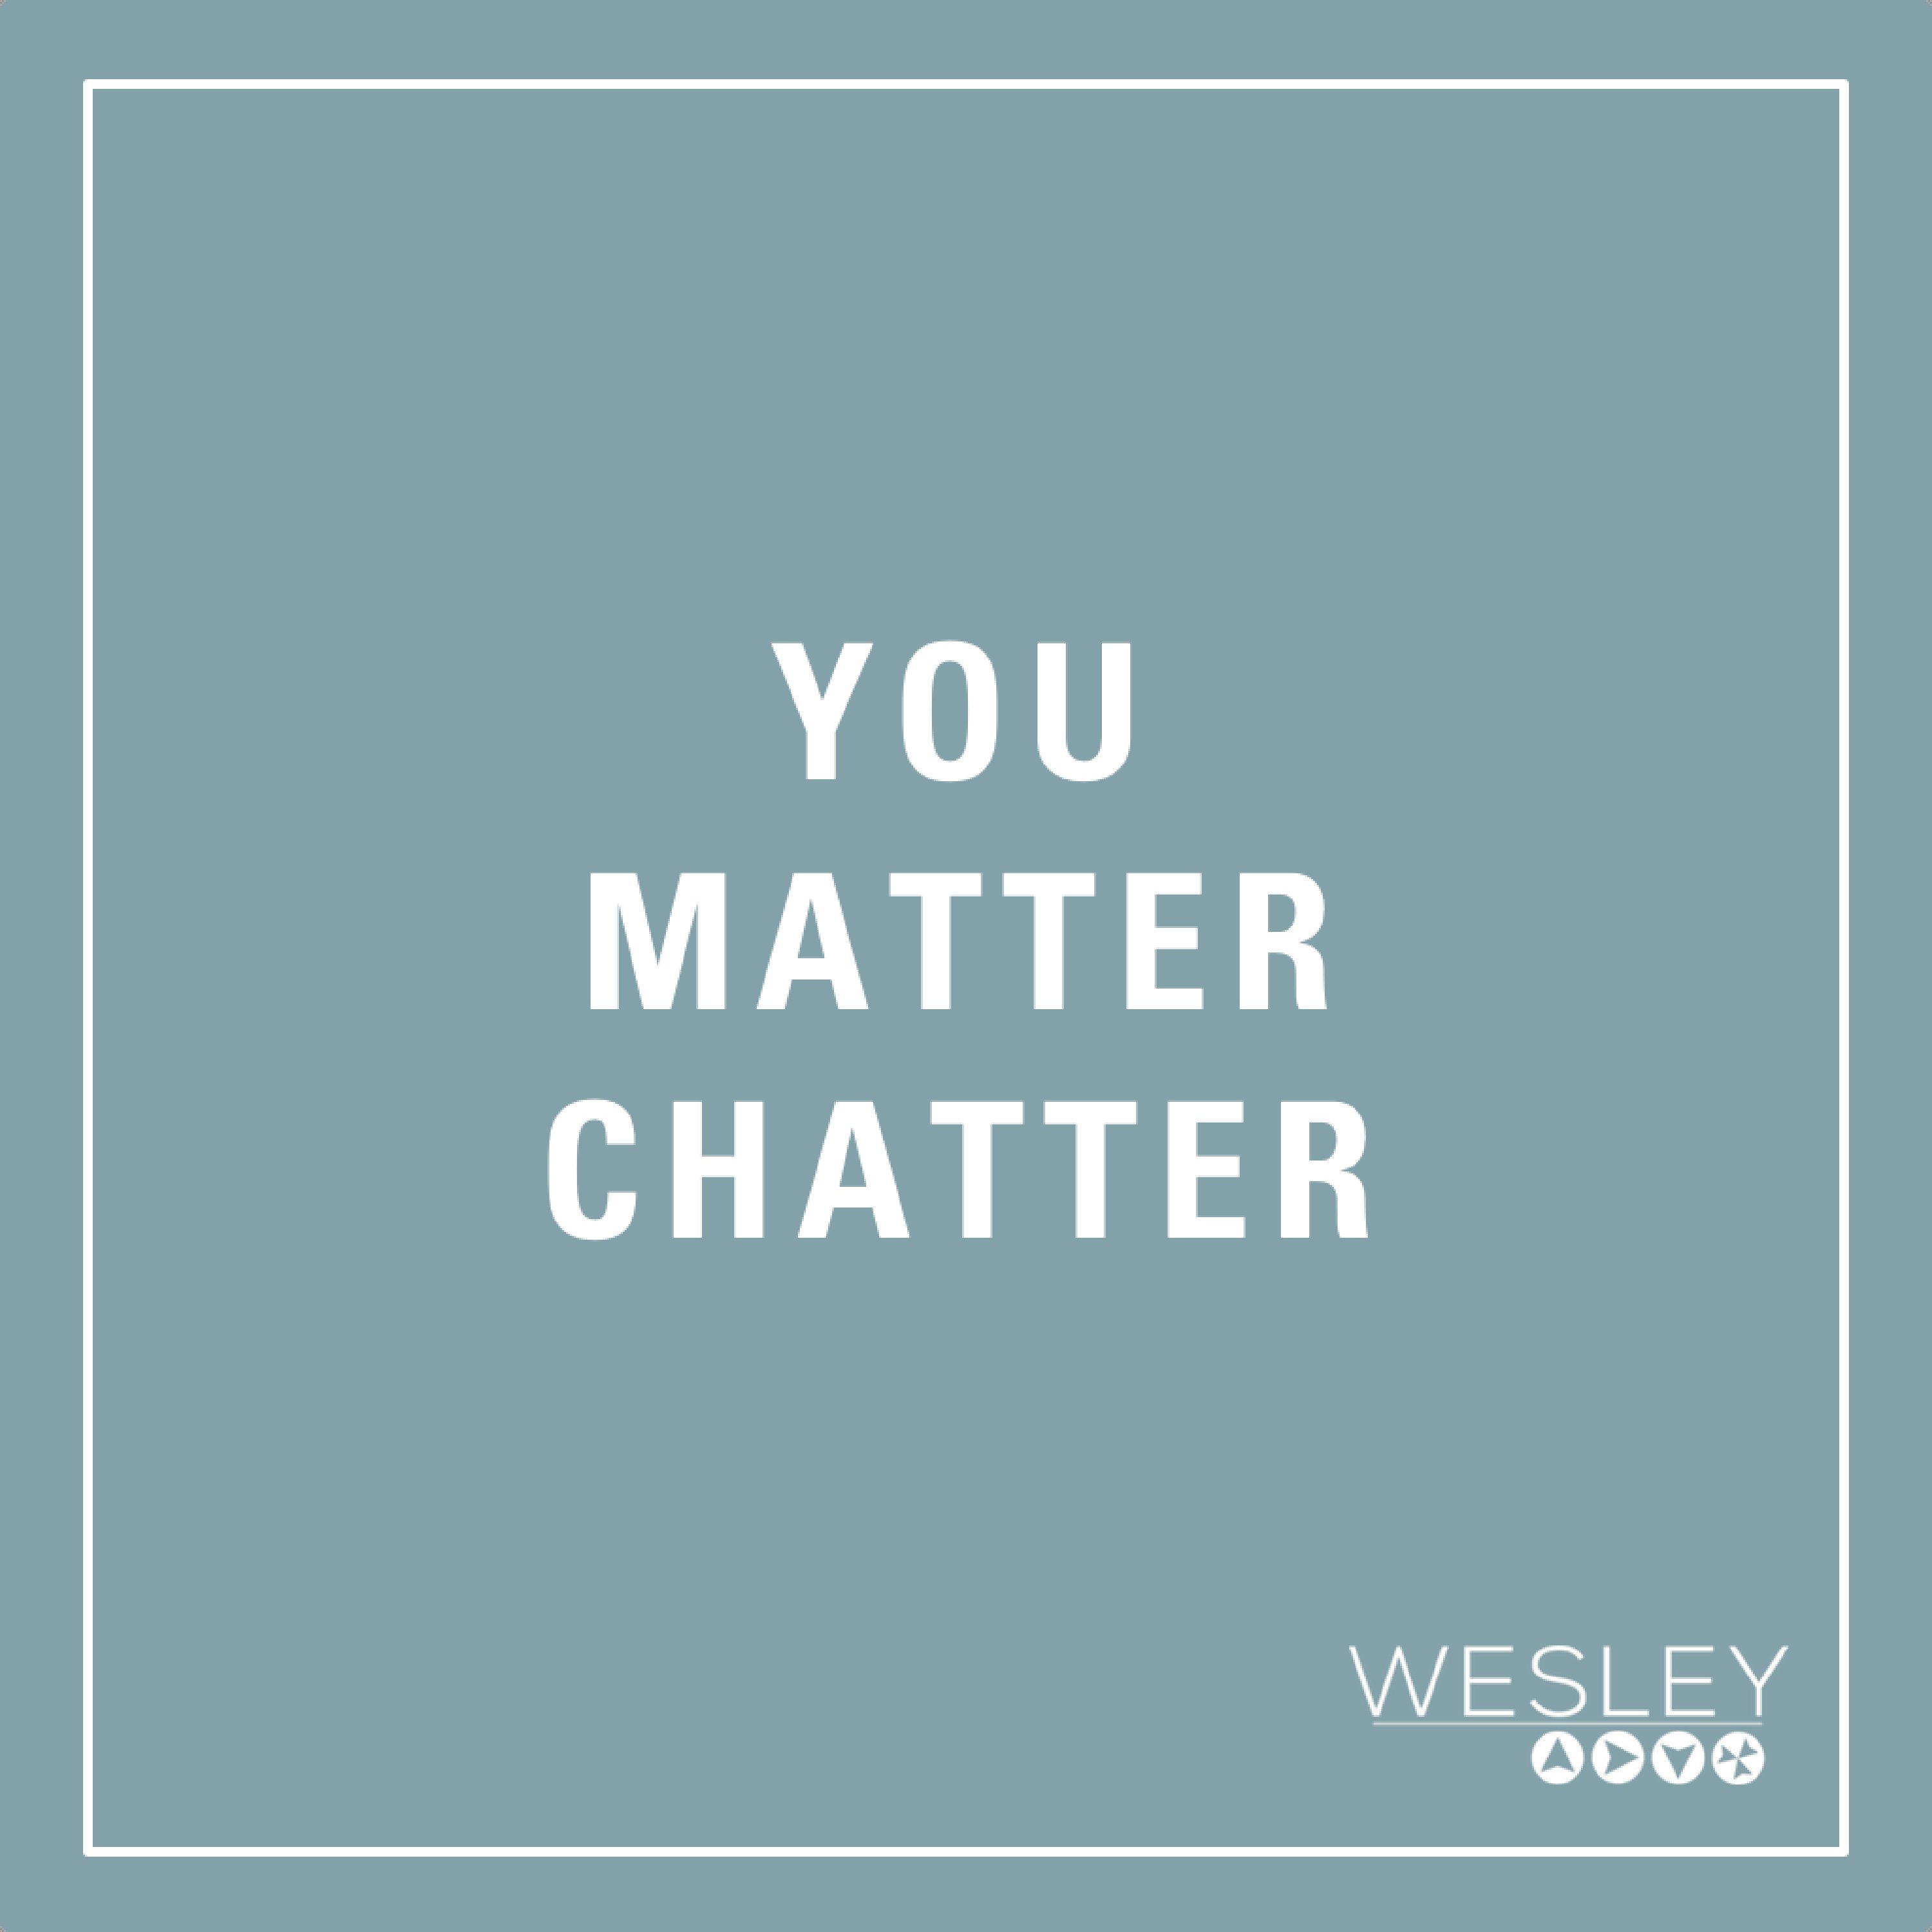 You Matter Chatter